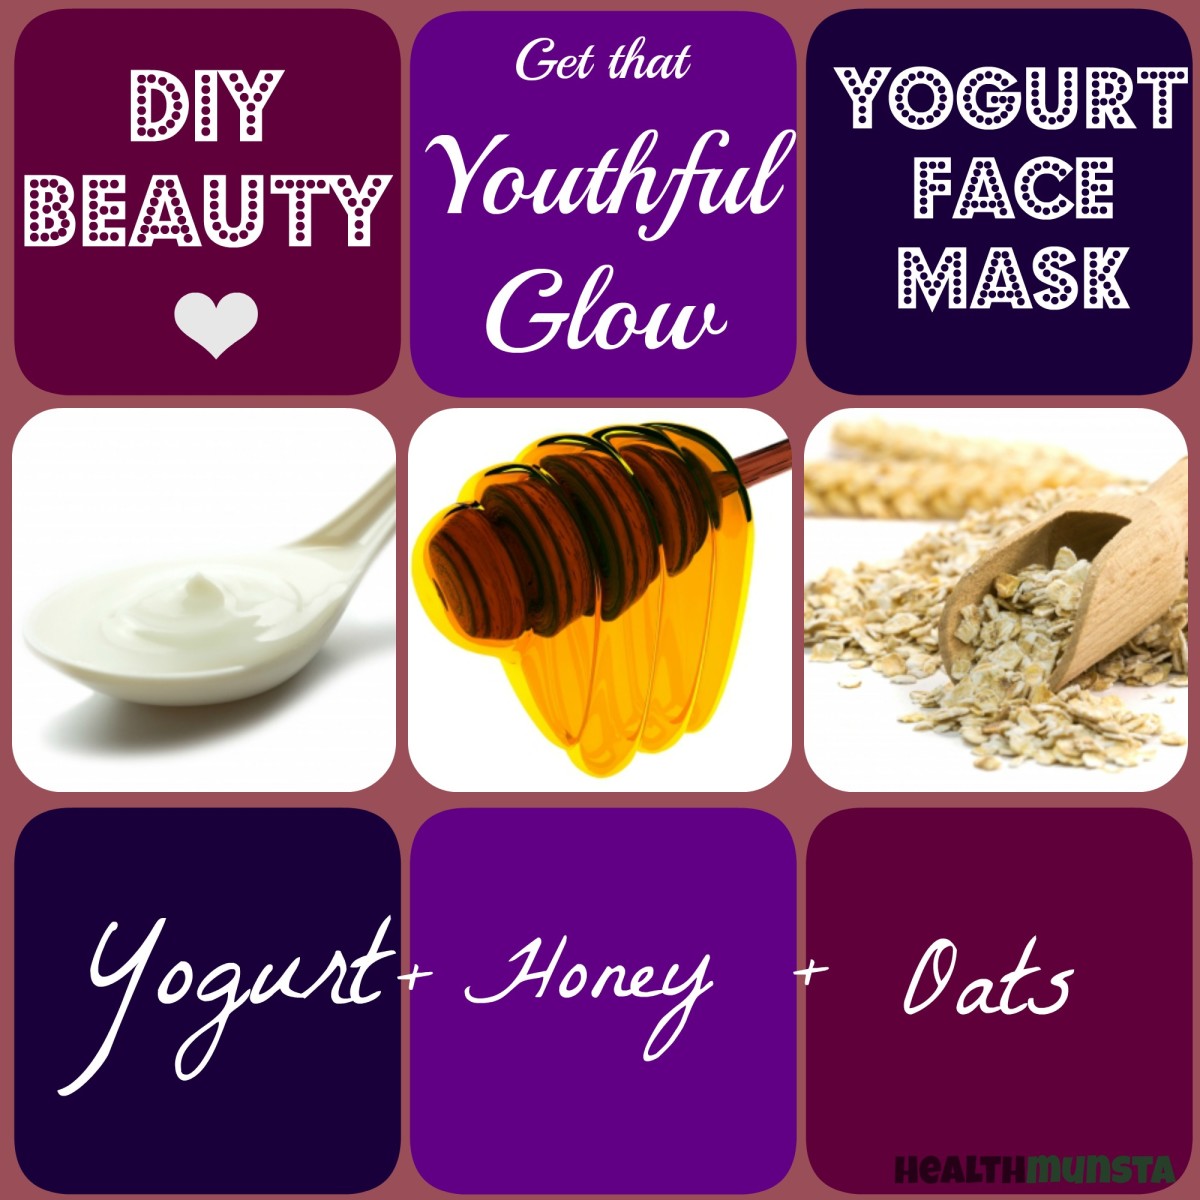 What does honey do for your skin?